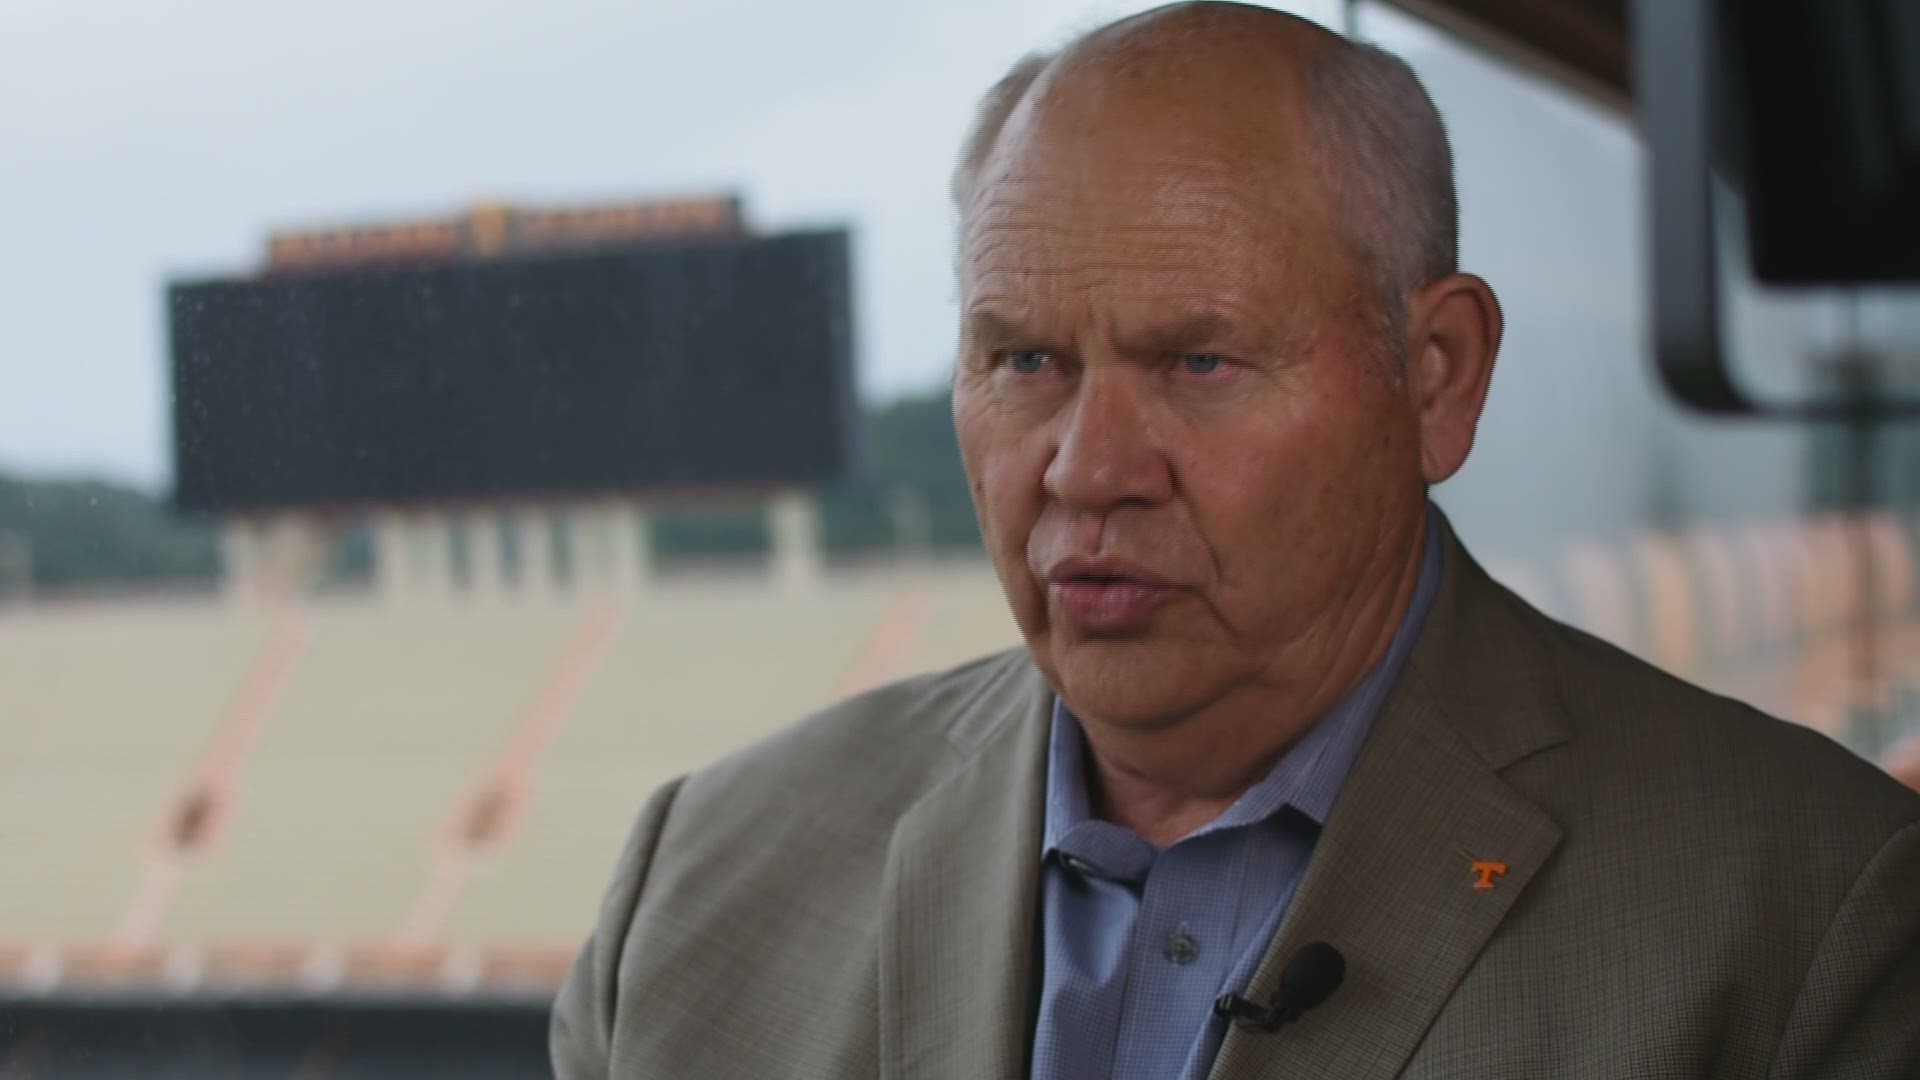 Phillip Fulmer says Martin's attitude and patience in waiting behind Peyton Manning was important. "He helped pull it together."